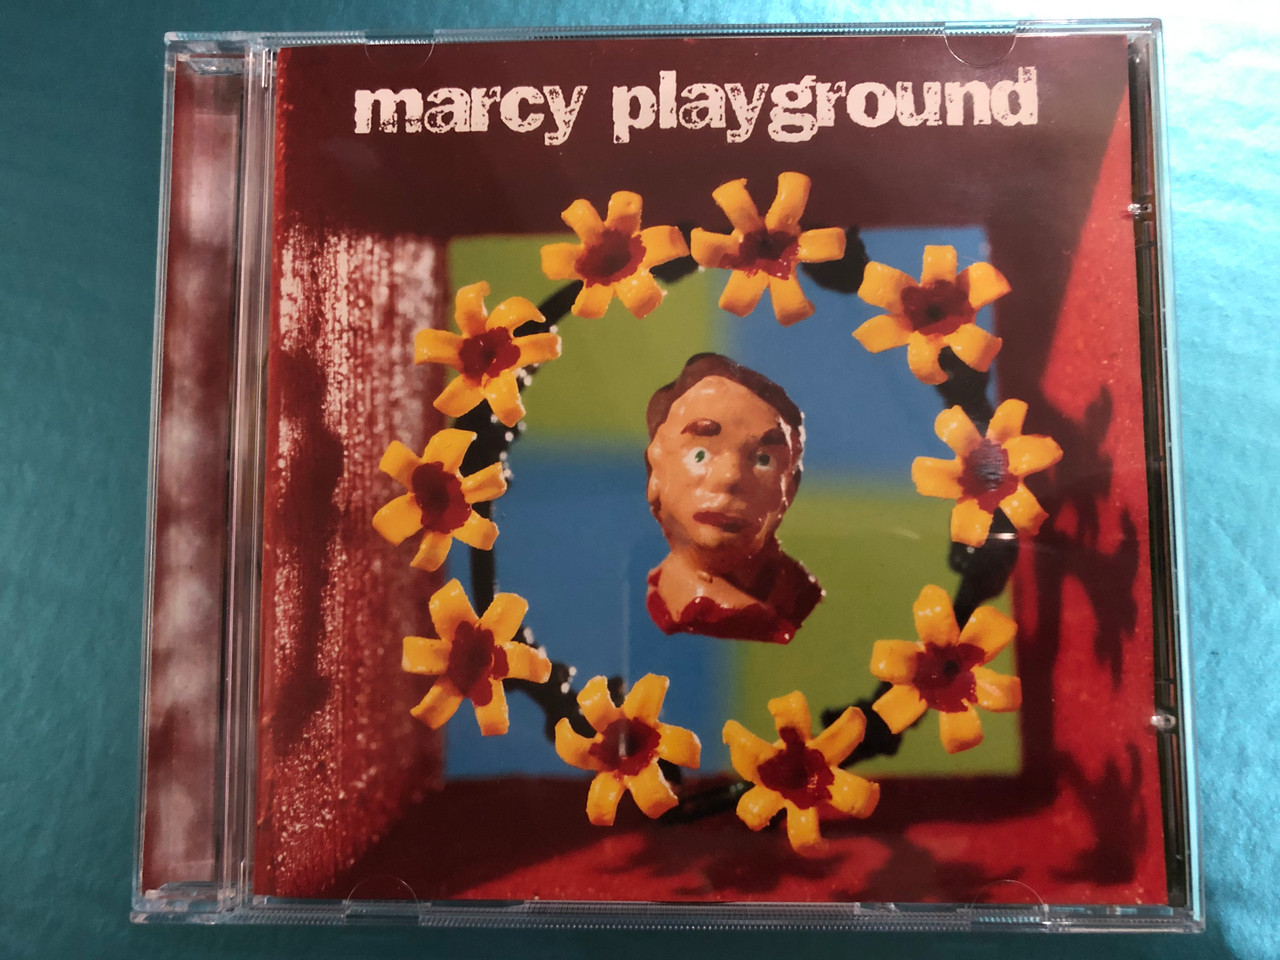 https://cdn10.bigcommerce.com/s-62bdpkt7pb/products/28032/images/167930/Marcy_Playground_Capitol_Records_Audio_CD_1997_724385356926_1__65672.1613119382.1280.1280.JPG?c=2&_ga=2.14712370.543434869.1618406858-6505287.1618406858